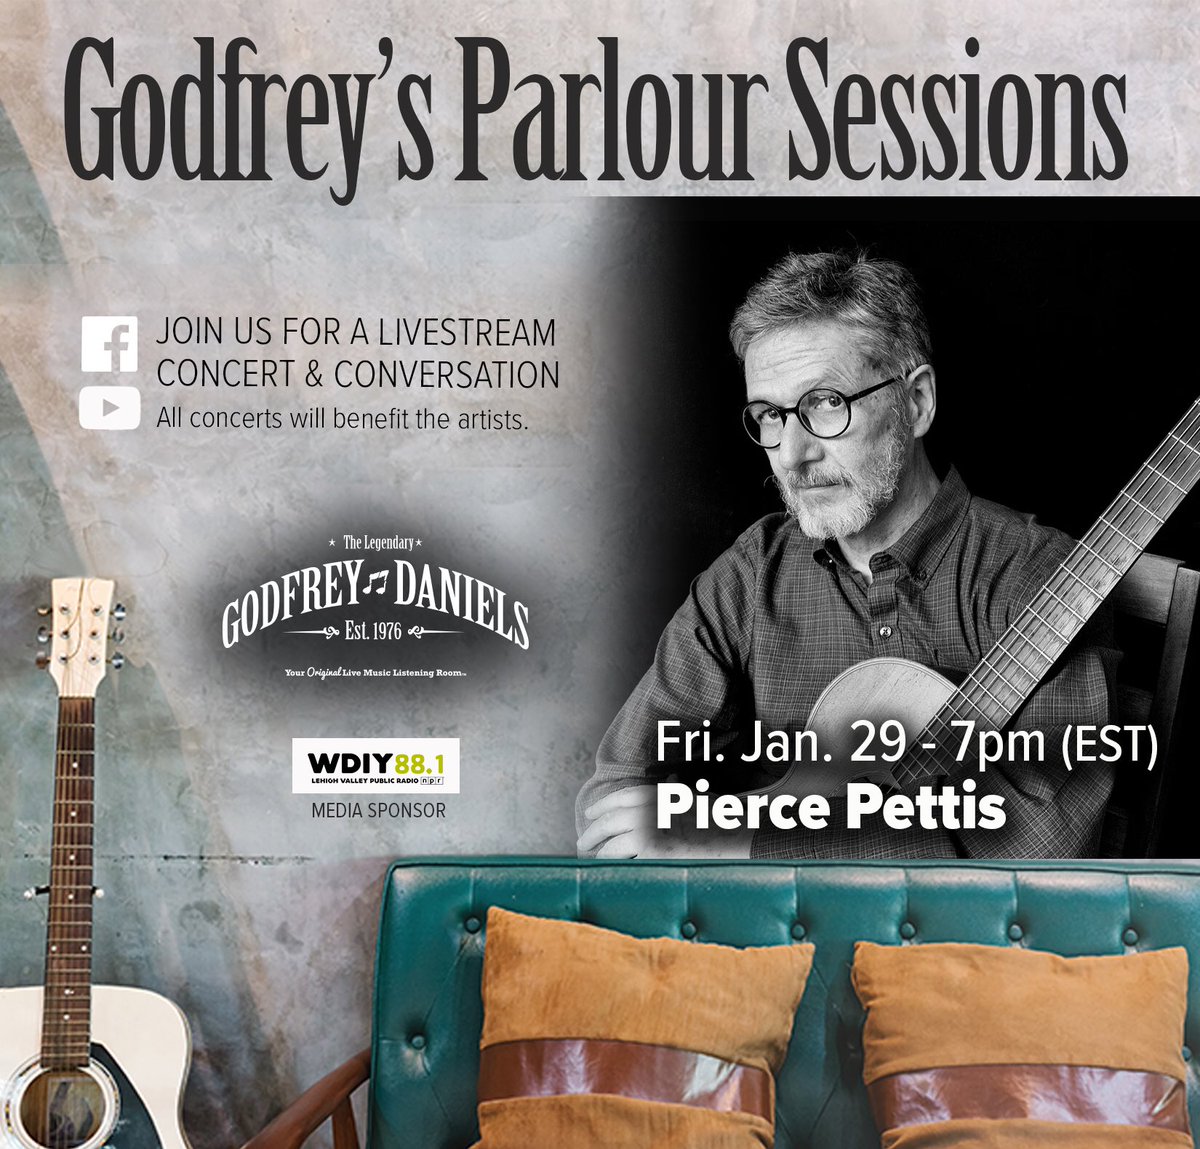 Tonight at 7:00 EST, Godfrey’s Parlour Session: Pierce Pettis Join us for an intimate livestream concert and conversation, hosted by @Dina_Hall, sponsored by @WDIYFM